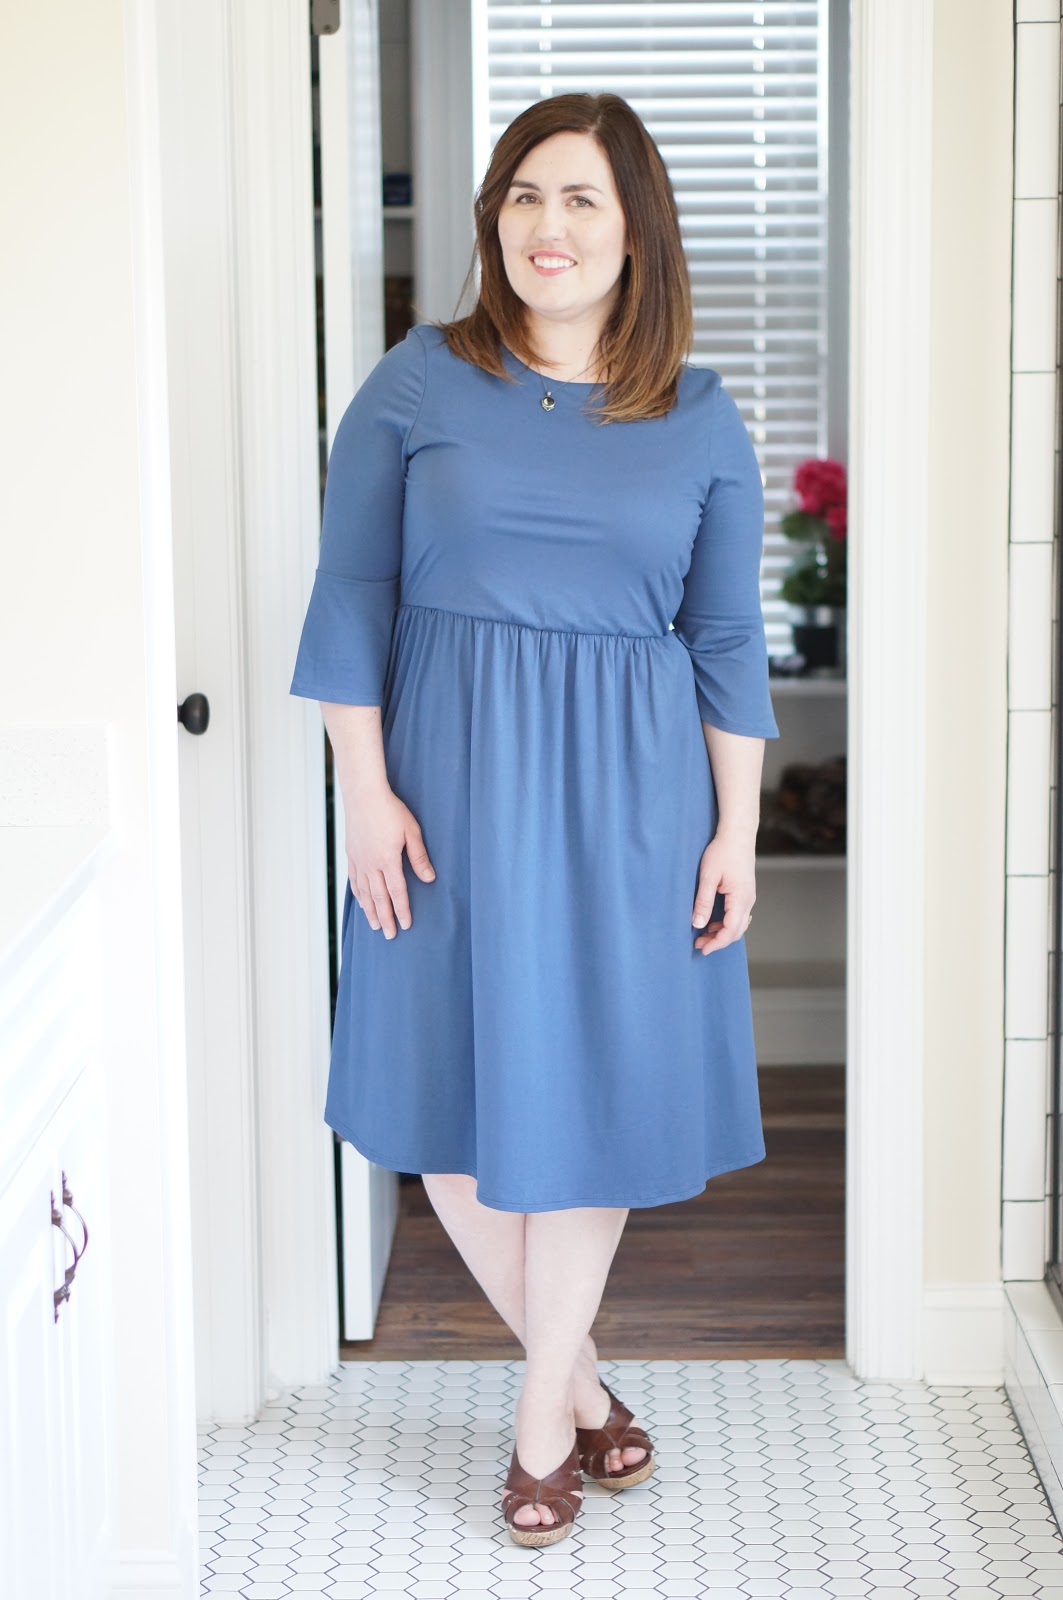 North Carolina style blogger Rebecca Lately shares her five favorite ethical brands! Read more here!